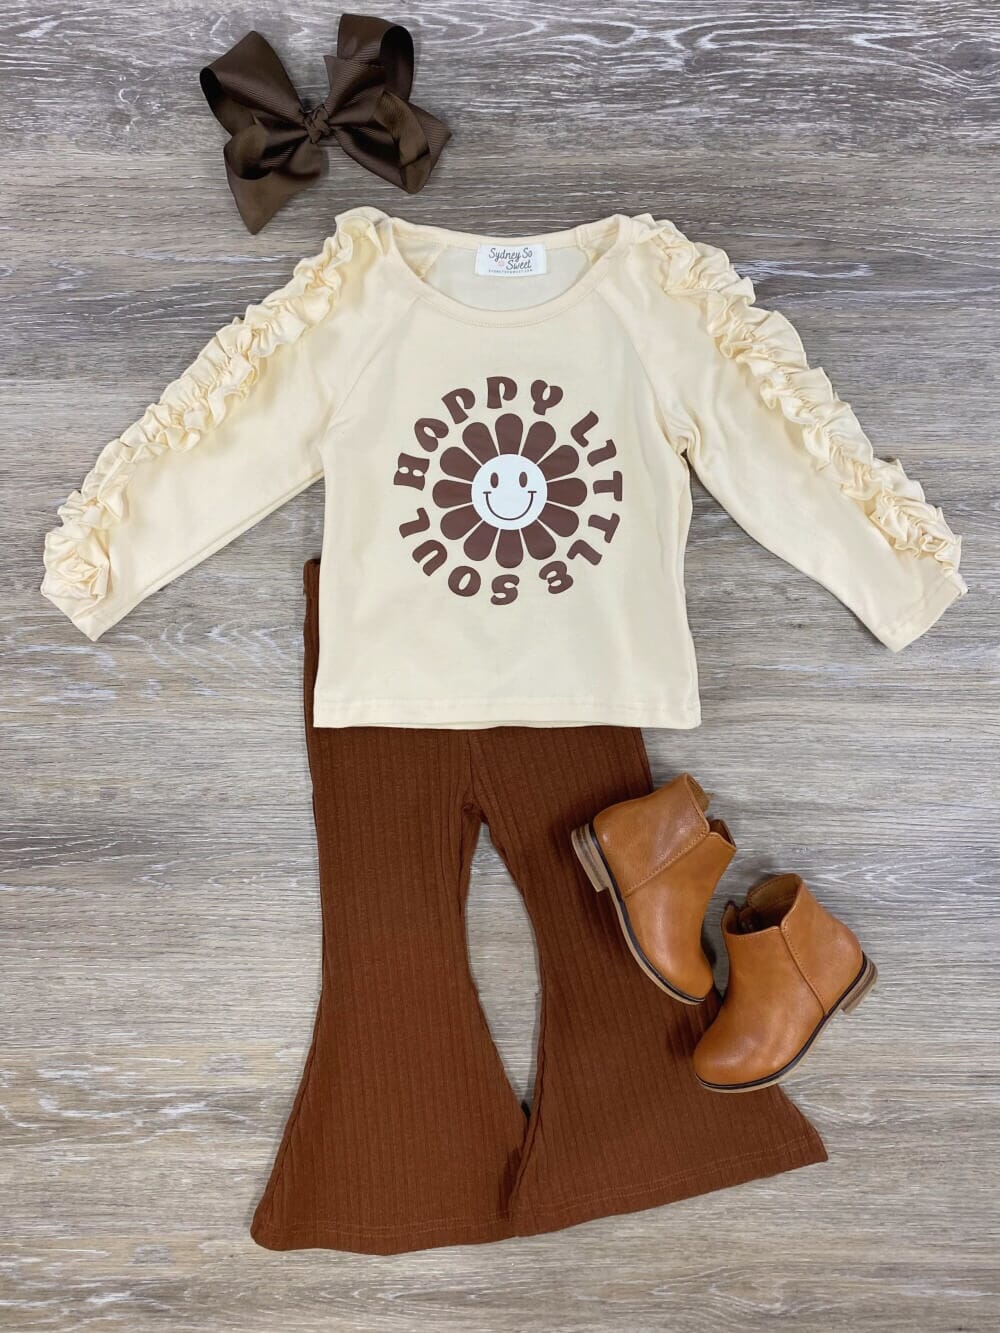 Happy Little Soul Girls Ribbed Bell Bottom Outfit